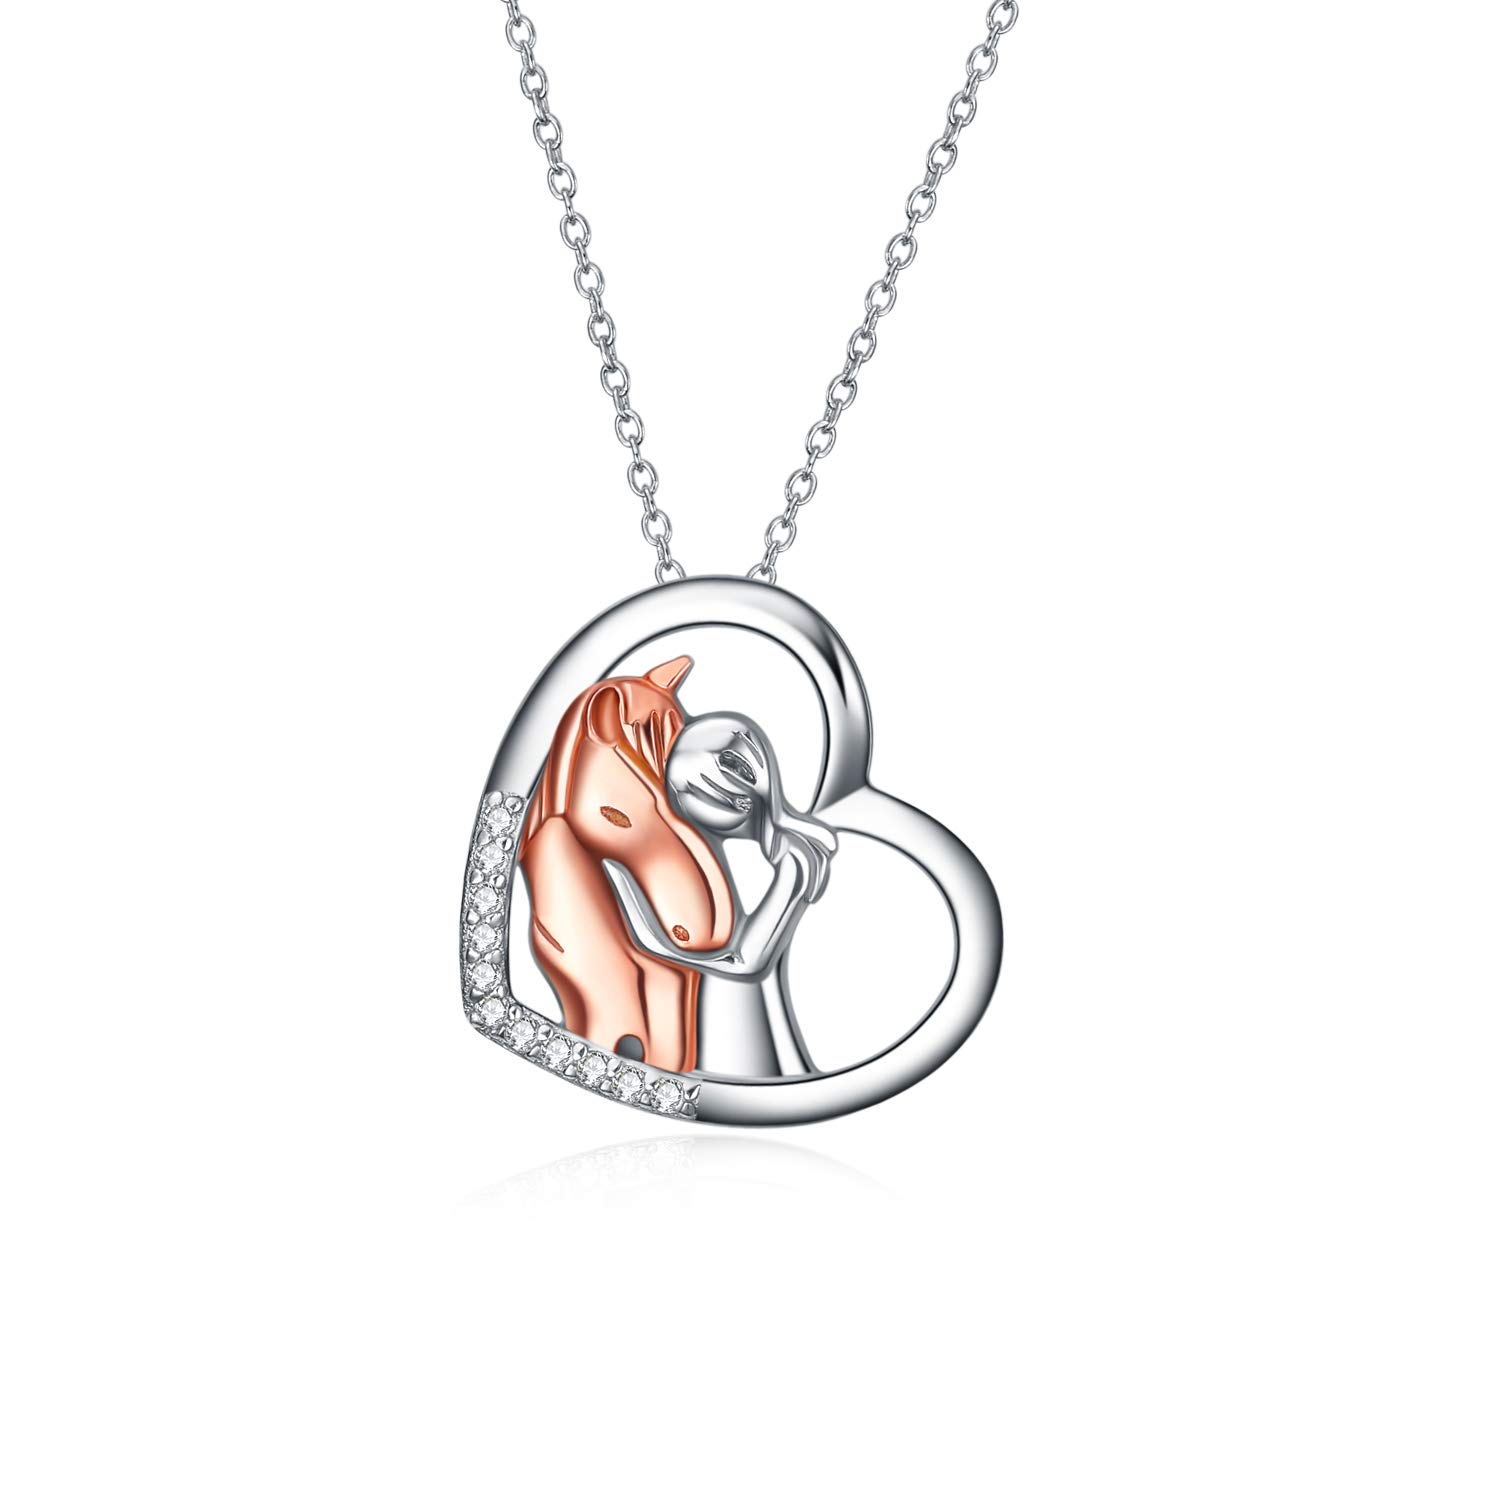 YFN Horse Pendant Necklace Jewelry 925 Sterling Silver Girls Embrace Horse Gift For Women Girls (Horse with Girl Necklace)